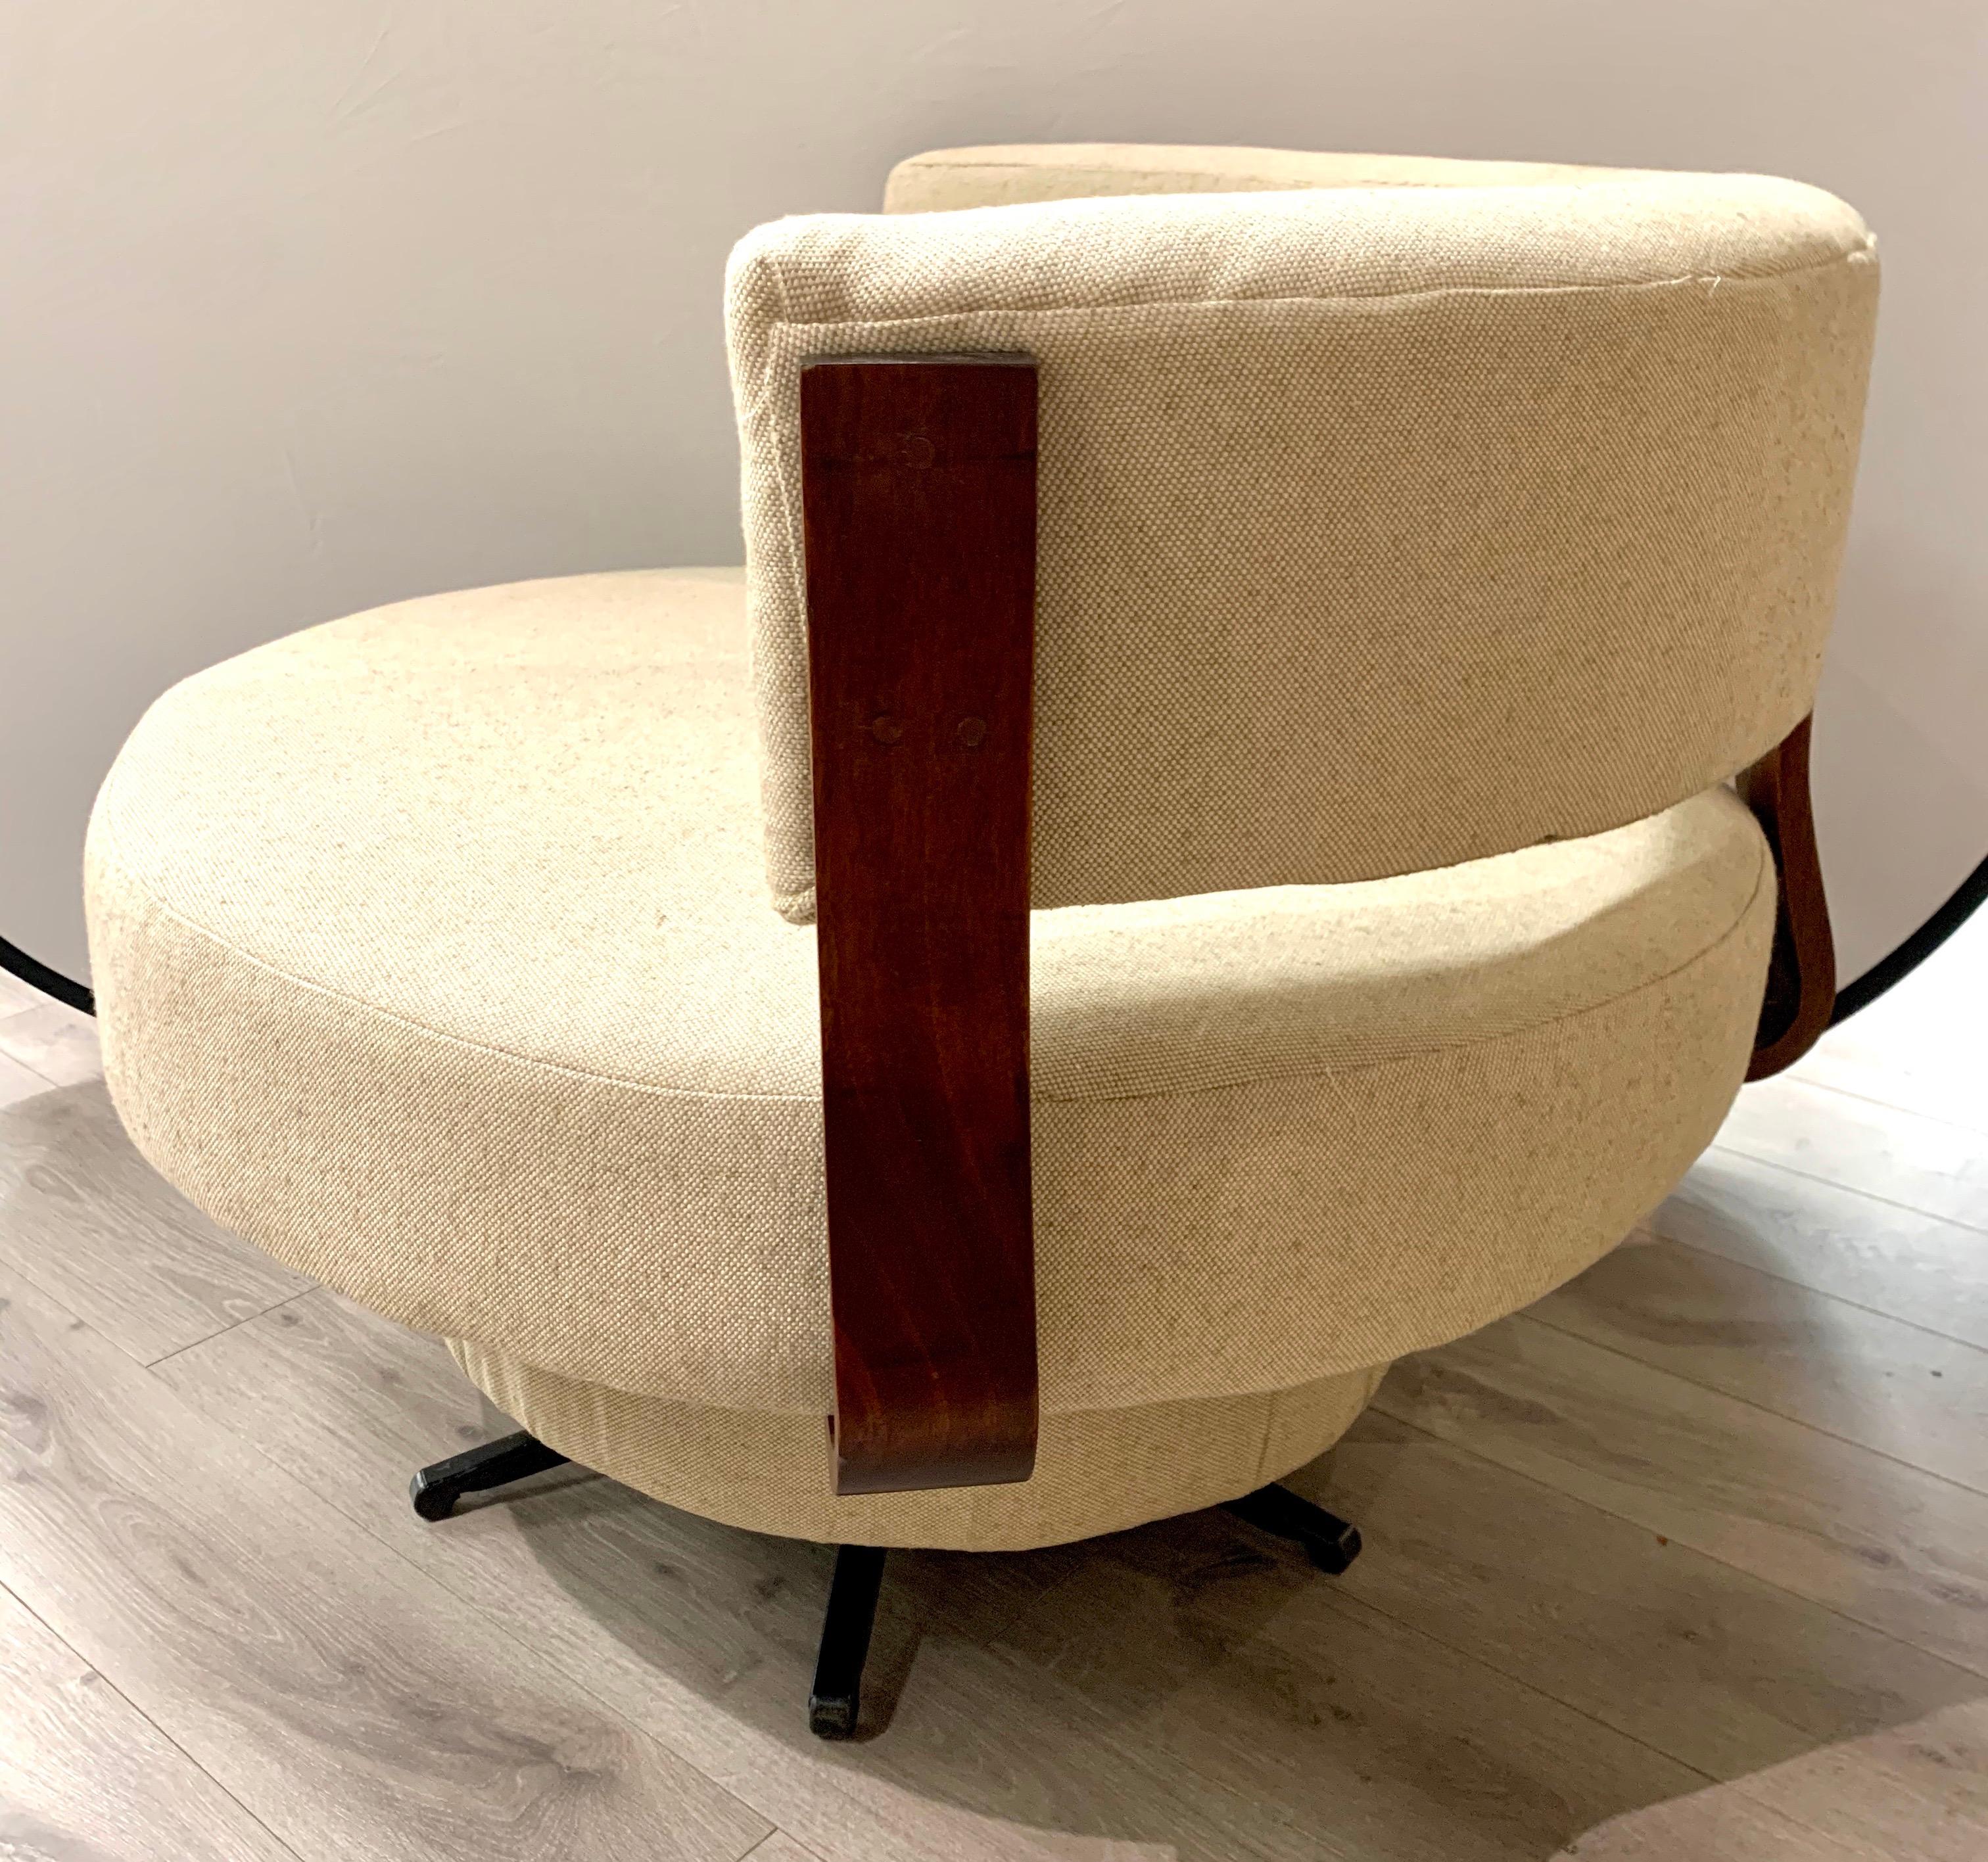 Pair of matching, elegant and large, Mid-Century Modern round swivel chairs with new Herman Miller oatmeal fabric.
Please note we have a single but are selling as a pair in this particular auction. Important to note
that the chairs are on the